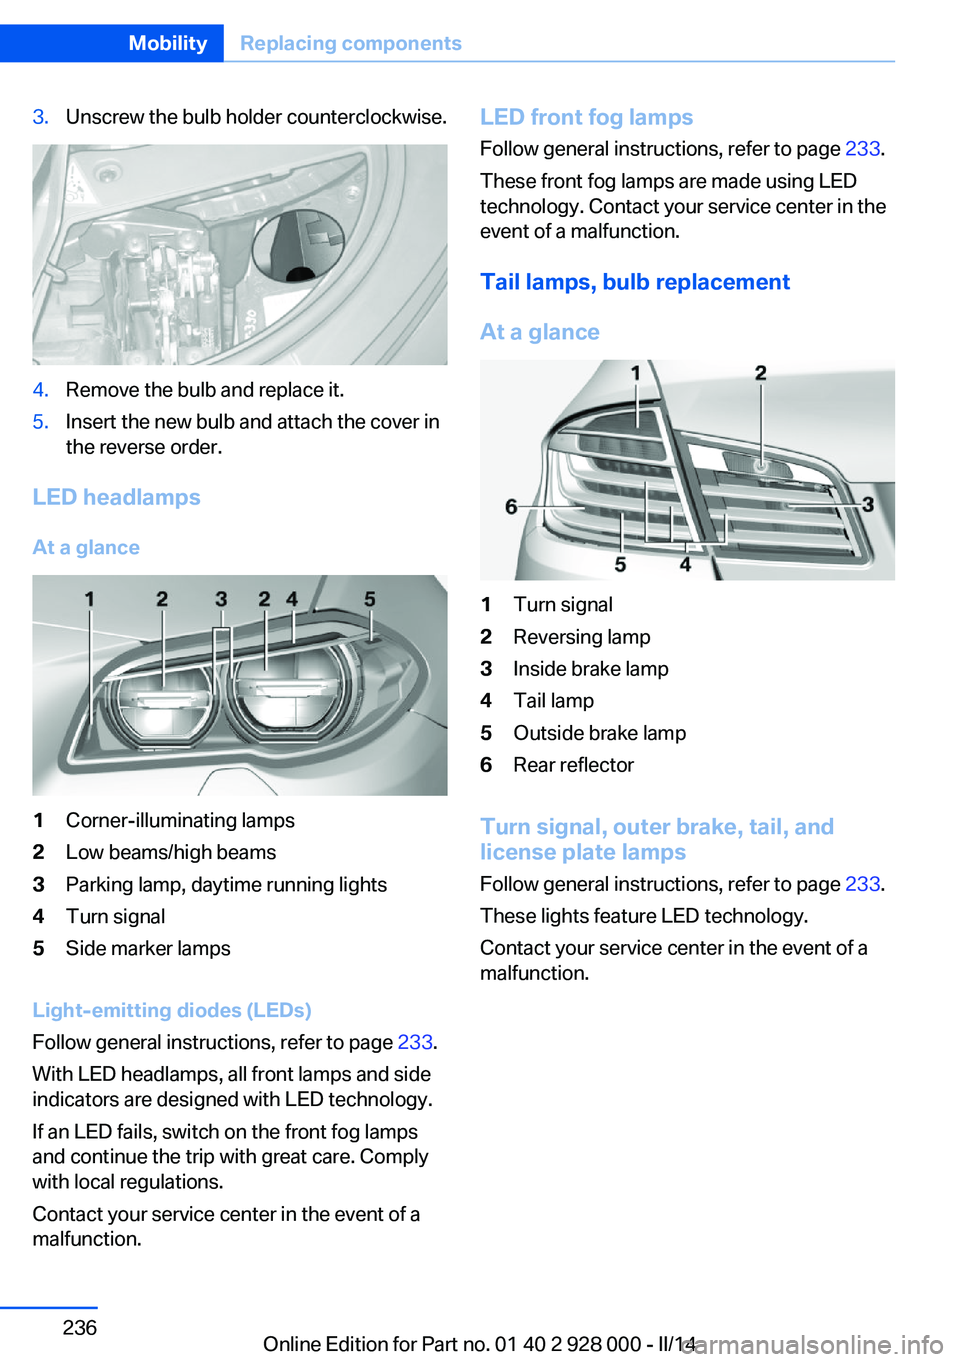 BMW 550I 2014  Owners Manual 3.Unscrew the bulb holder counterclockwise.4.Remove the bulb and replace it.5.Insert the new bulb and attach the cover in
the reverse order.
LED headlamps
At a glance
1Corner-illuminating lamps2Low be